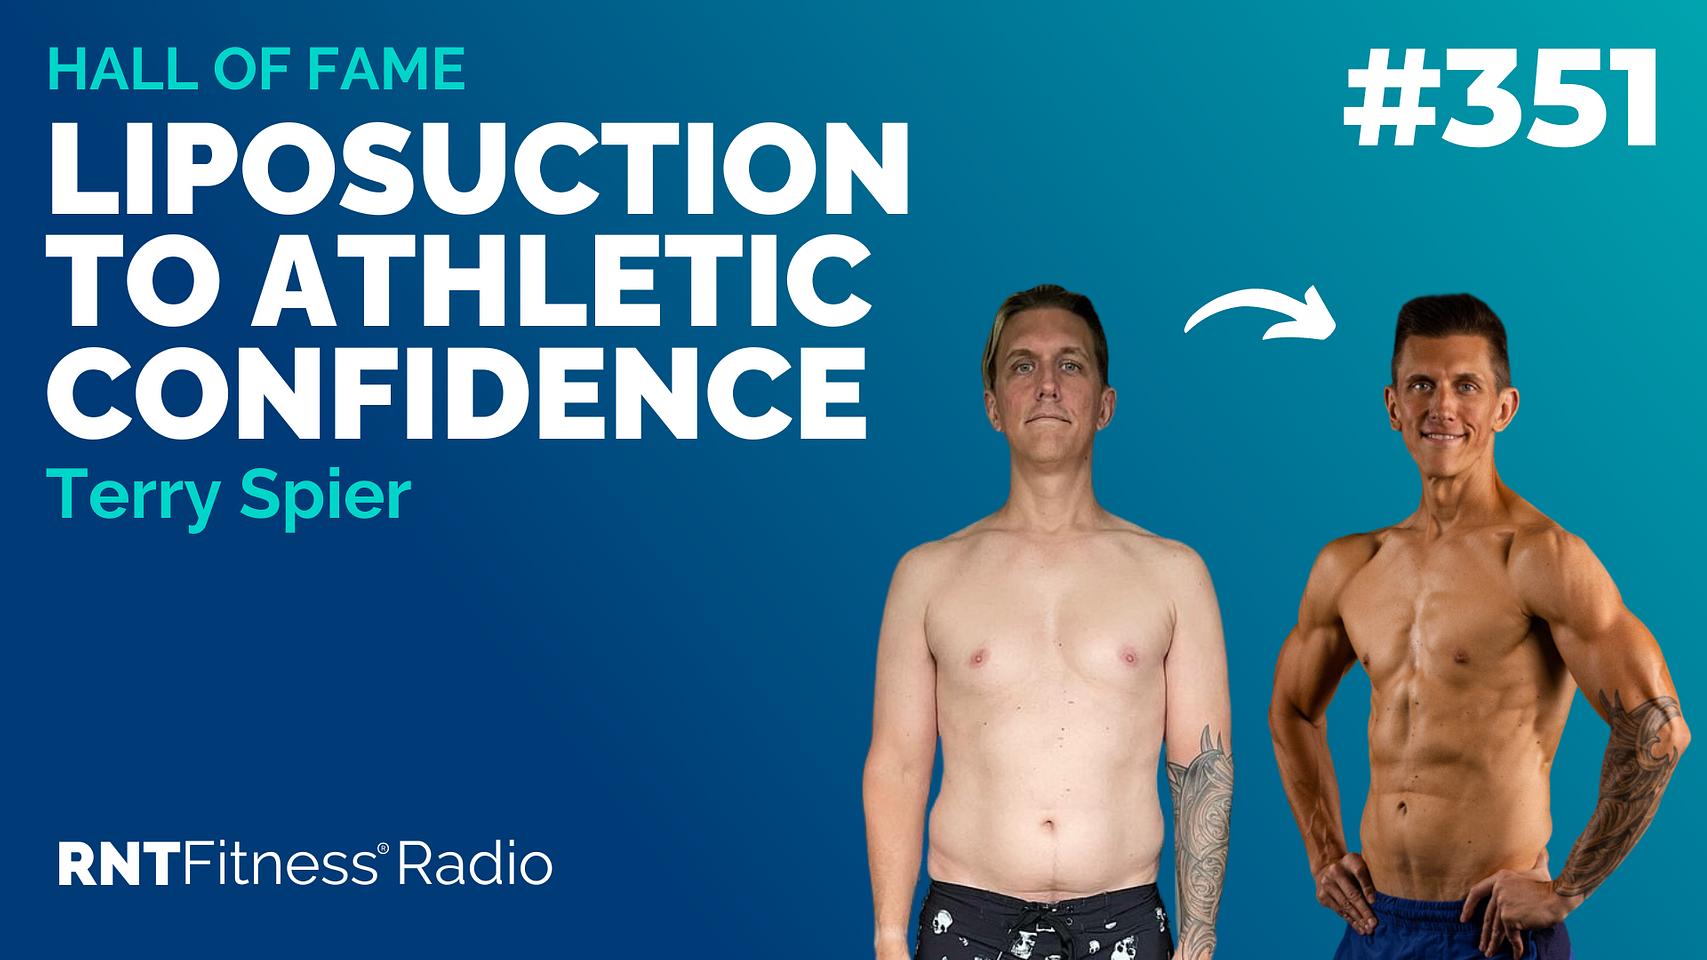 Ep 351 - Hall Of Fame | Terry Spier: Liposuction To Athletic Confidence